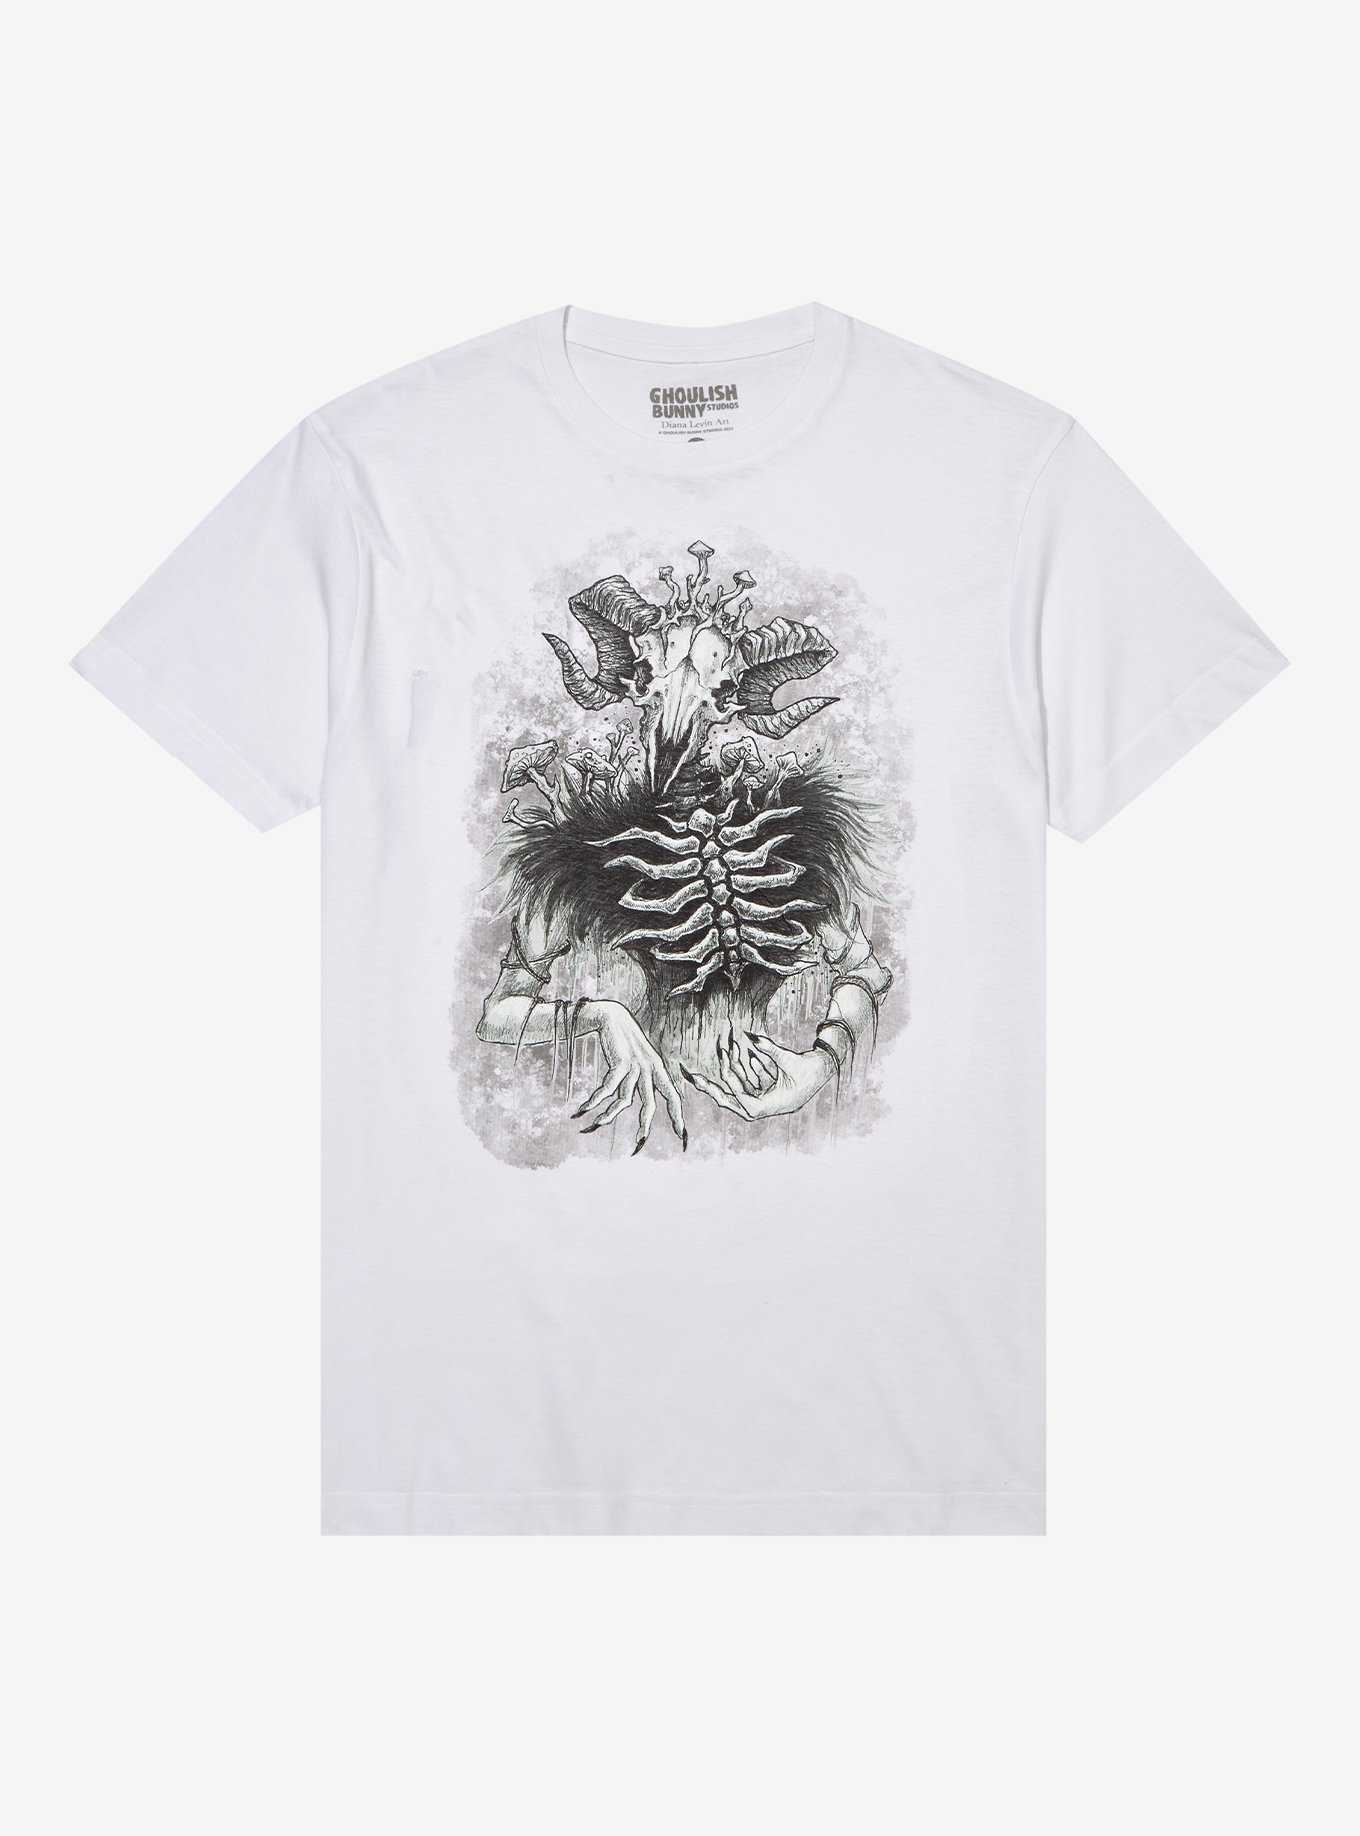 Skeletal Forest Creature T-Shirt By Ghoulish Bunny Studios, , hi-res